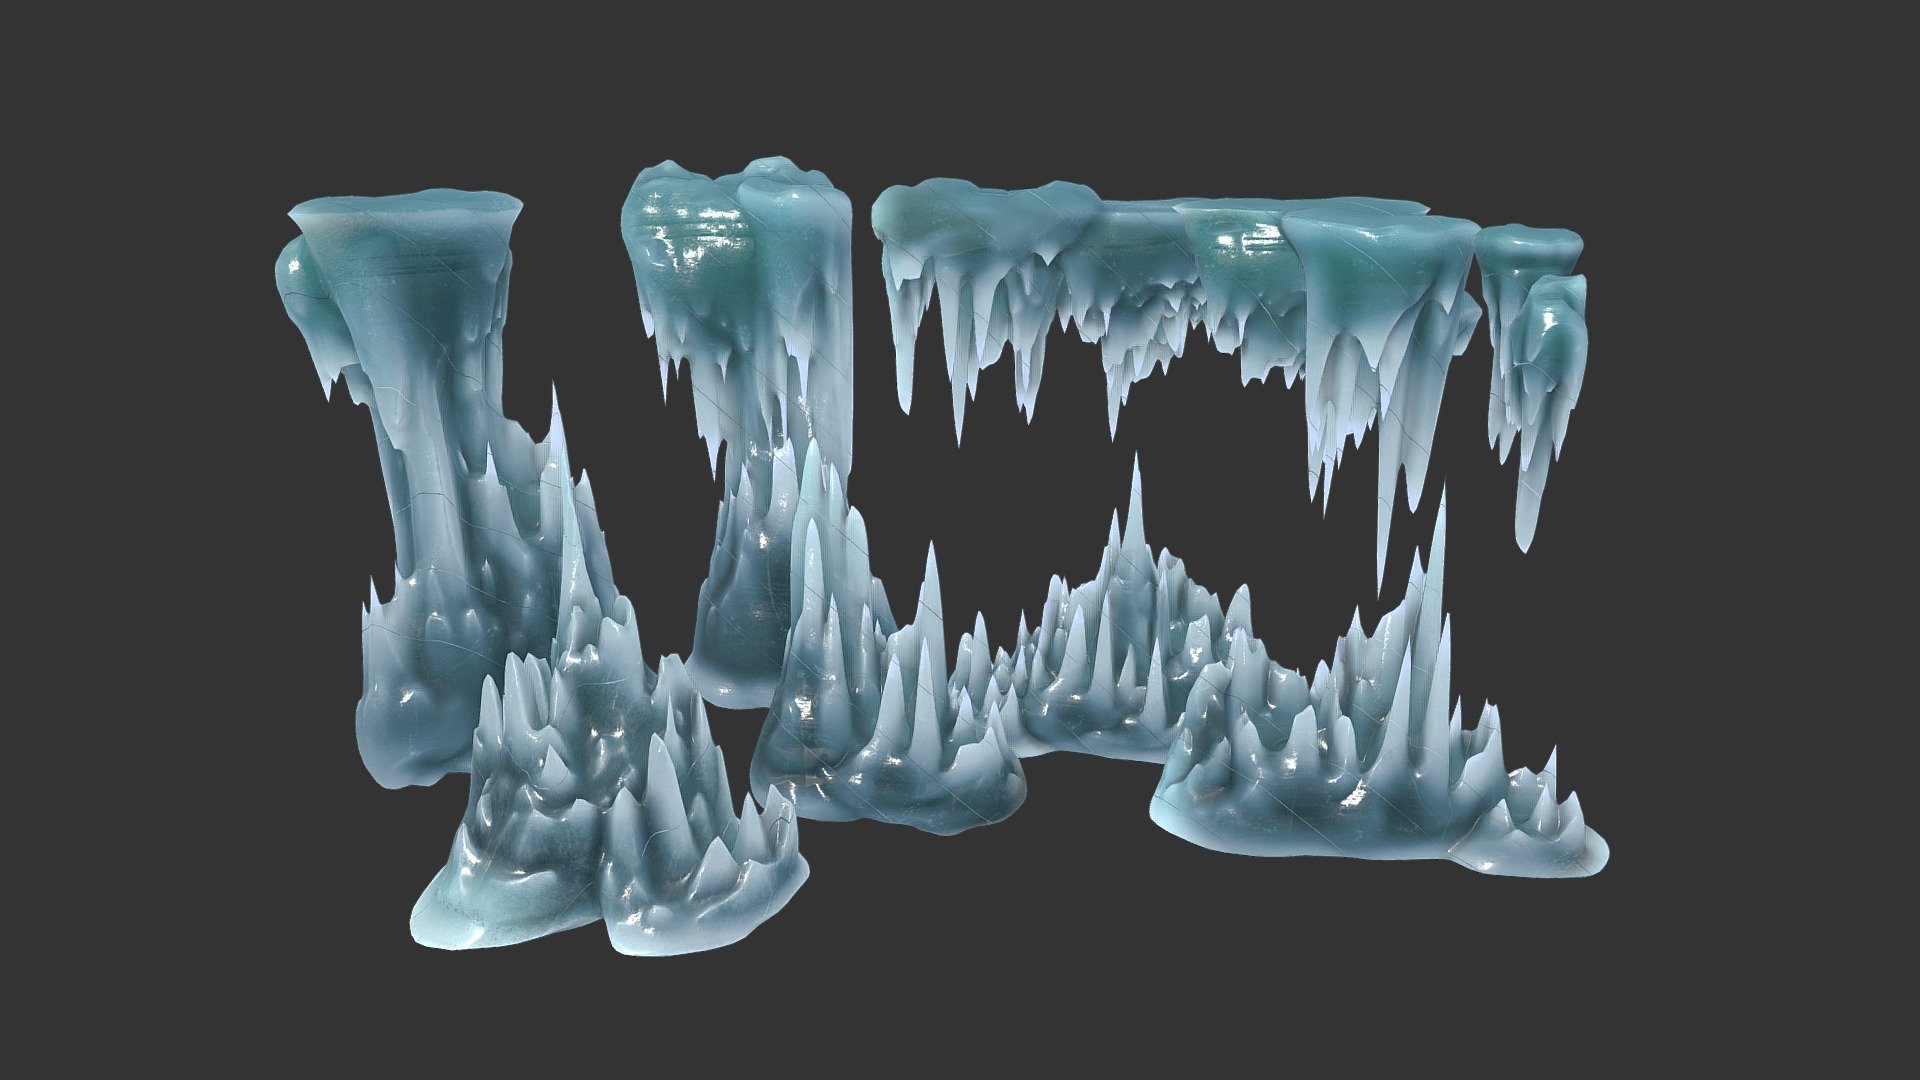 The preview model has been sliced to protect the safety of the model in a real-time viewing environment. The model you purchase will be a complete and unaltered version without any slicing.

A. General product description:

This product contains 10 ice spike cave 3D models. The shapes of these models are icy stalactites, they are cylindrical shapes formed by dripping water in a frozen environment. The model's details are shown from various angles, allowing you to duplicate and manipulate them by rotating, flipping, and scaling to create different shapes.

B. Description of packages:




Polycount: This product features 10 low-poly ice spike cave model with approximately 5000 polygons.

Texture: It comes with a high-resolution texture measuring 4096 x 4096, which includes Basecolor, Normal Direct-X, Normal, Roughness, Glossiness, Ambient Occlusion, Emissive, and SpecularSmoothness maps.
 - Low poly Ice Spike Cave 230501 - Buy Royalty Free 3D model by Mega 3D (@3dlandscape) 3d model